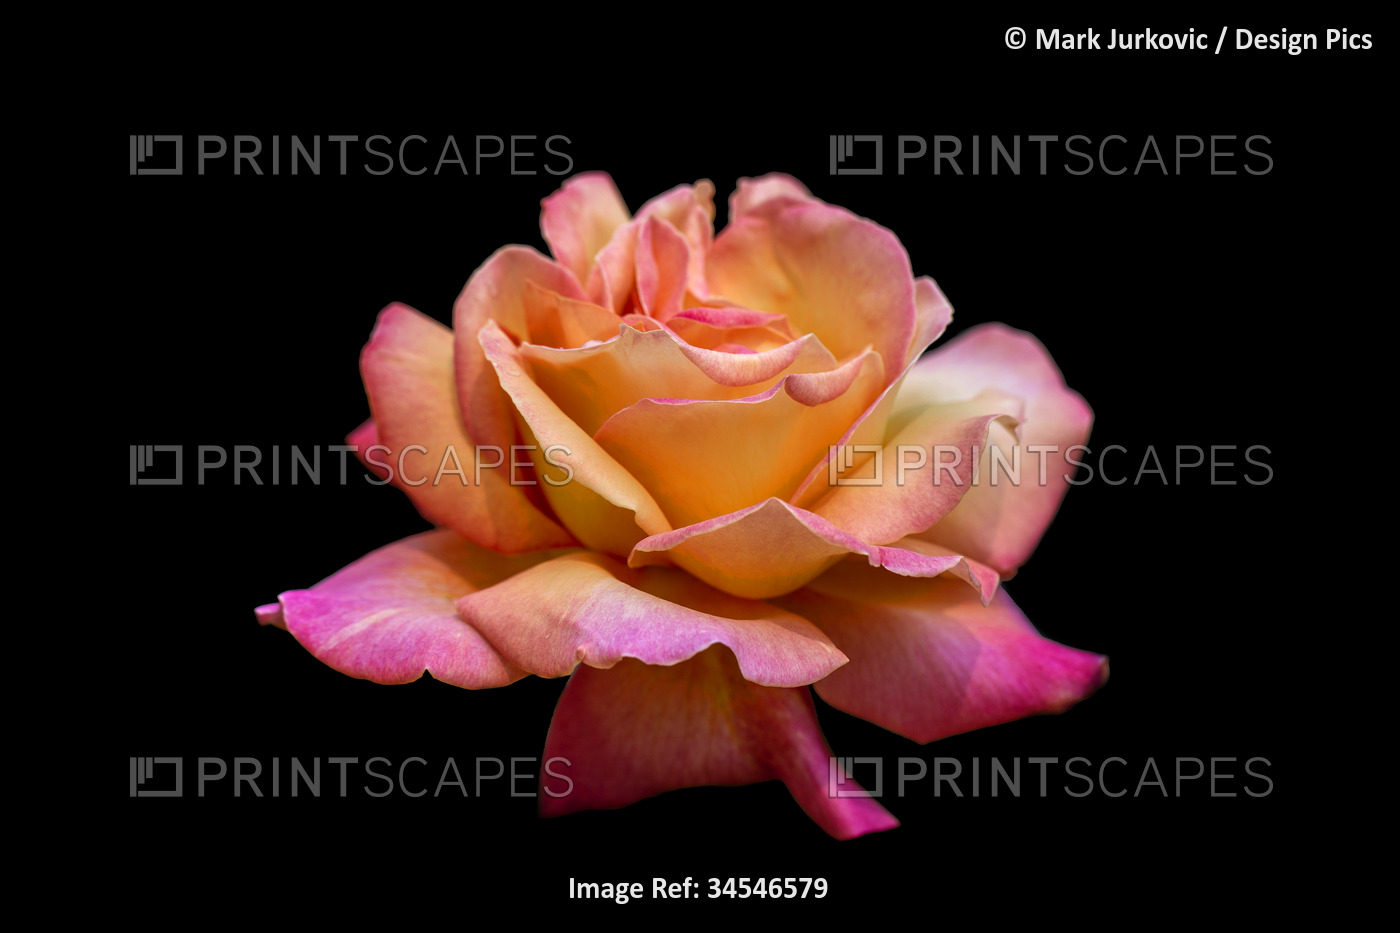 Rosa 'Chicago Peace' Rose on a black background; Studio